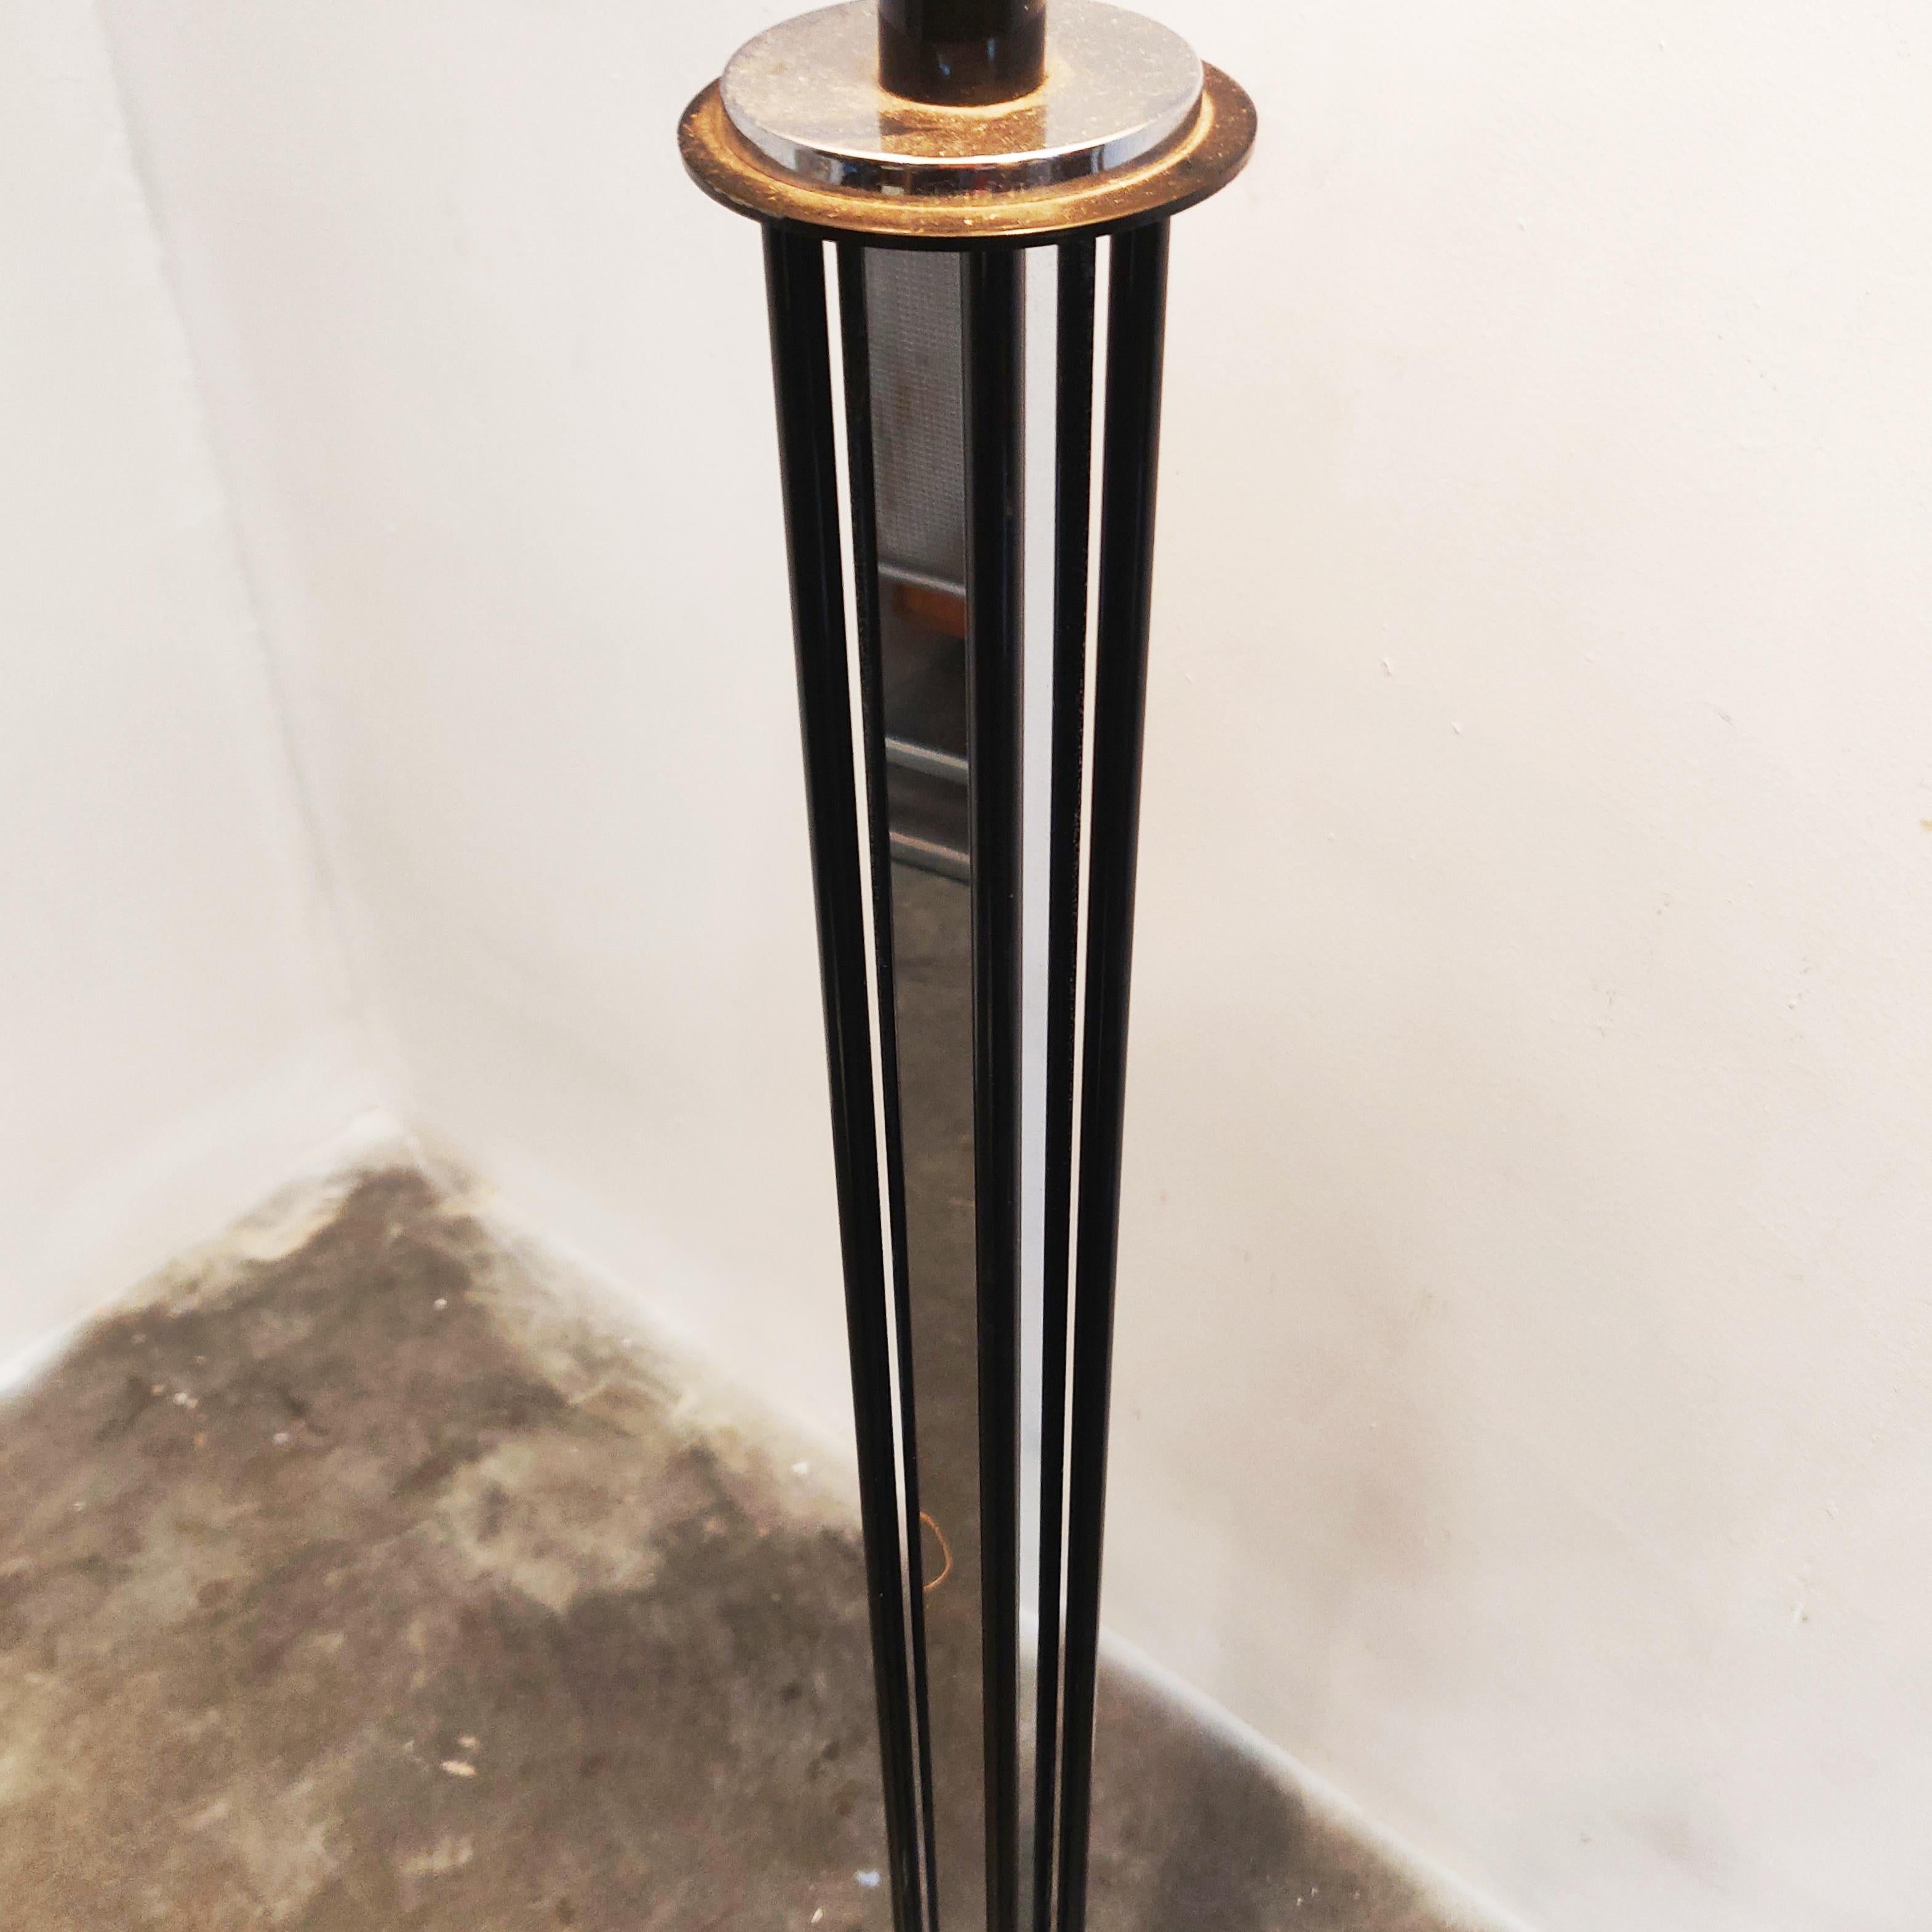 20th Century Hollywood Regency Floor Lamp in style of Willy Rizzo. For Sale 3